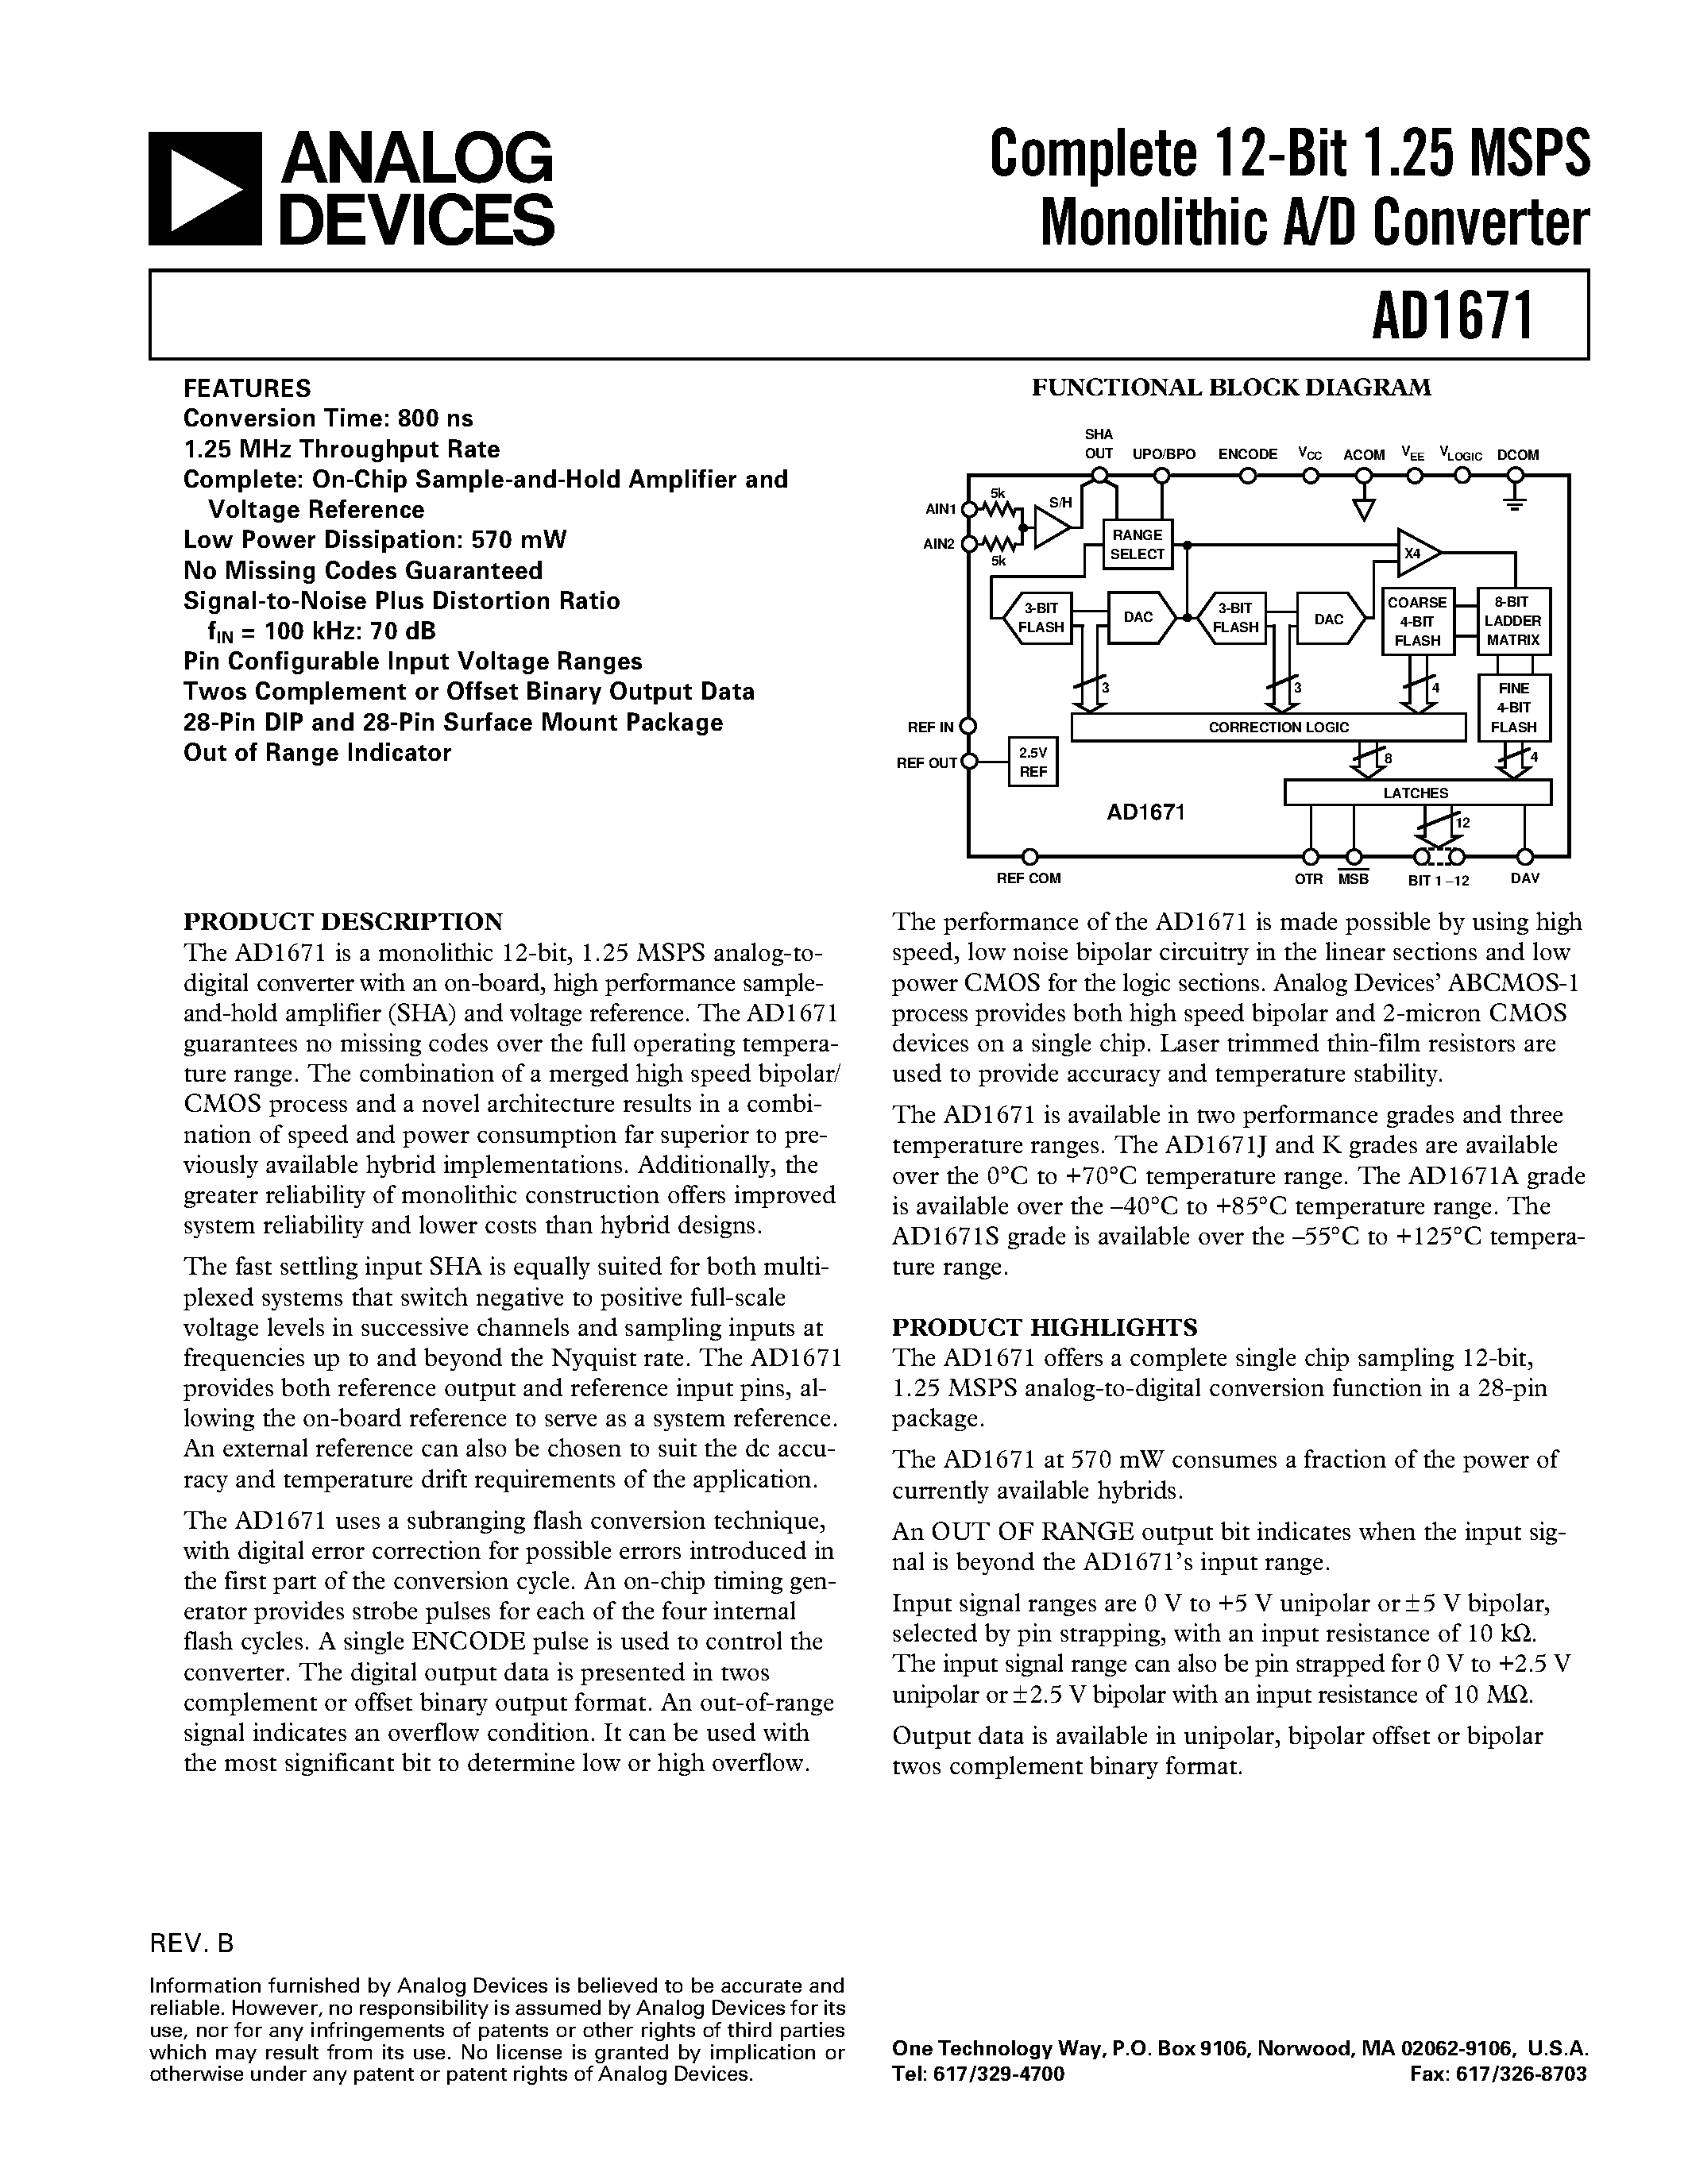 Datasheet AD1671 - Complete 12-Bit 1.25 MSPS Monolithic A/D Converter page 1